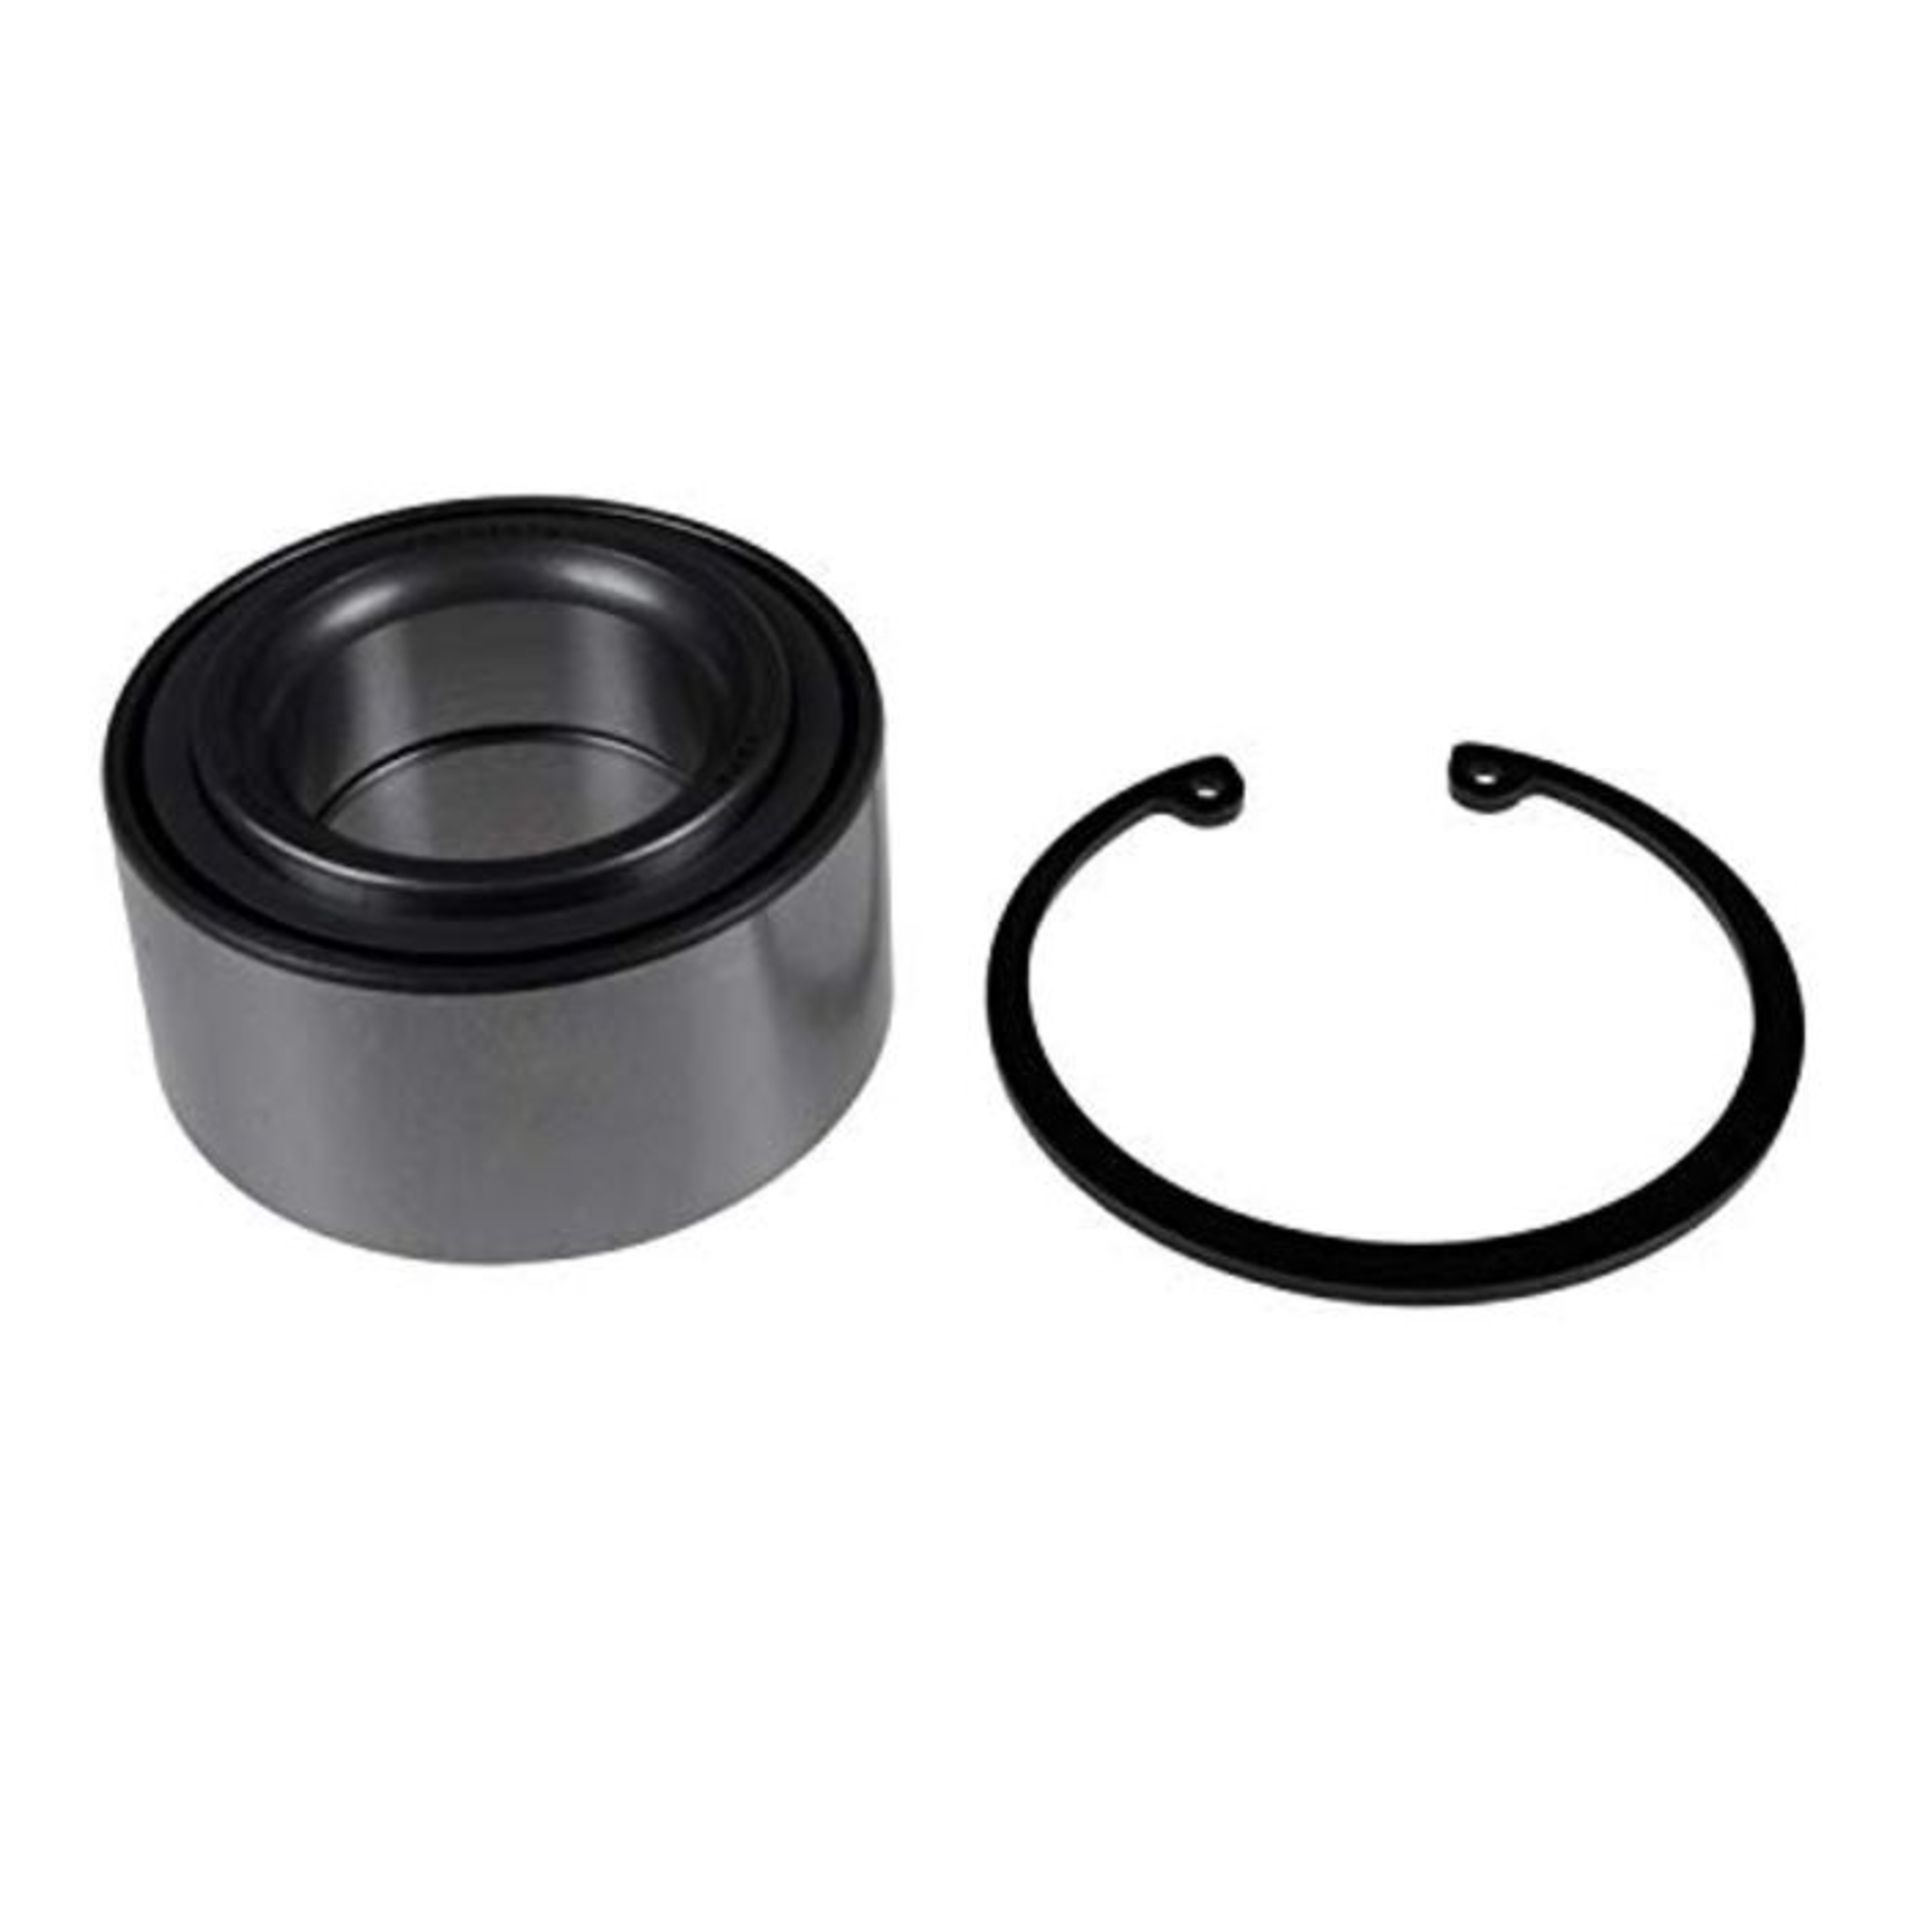 Blue Print ADT38273 Wheel Bearing Kit with ABS sensor ring, pack of one